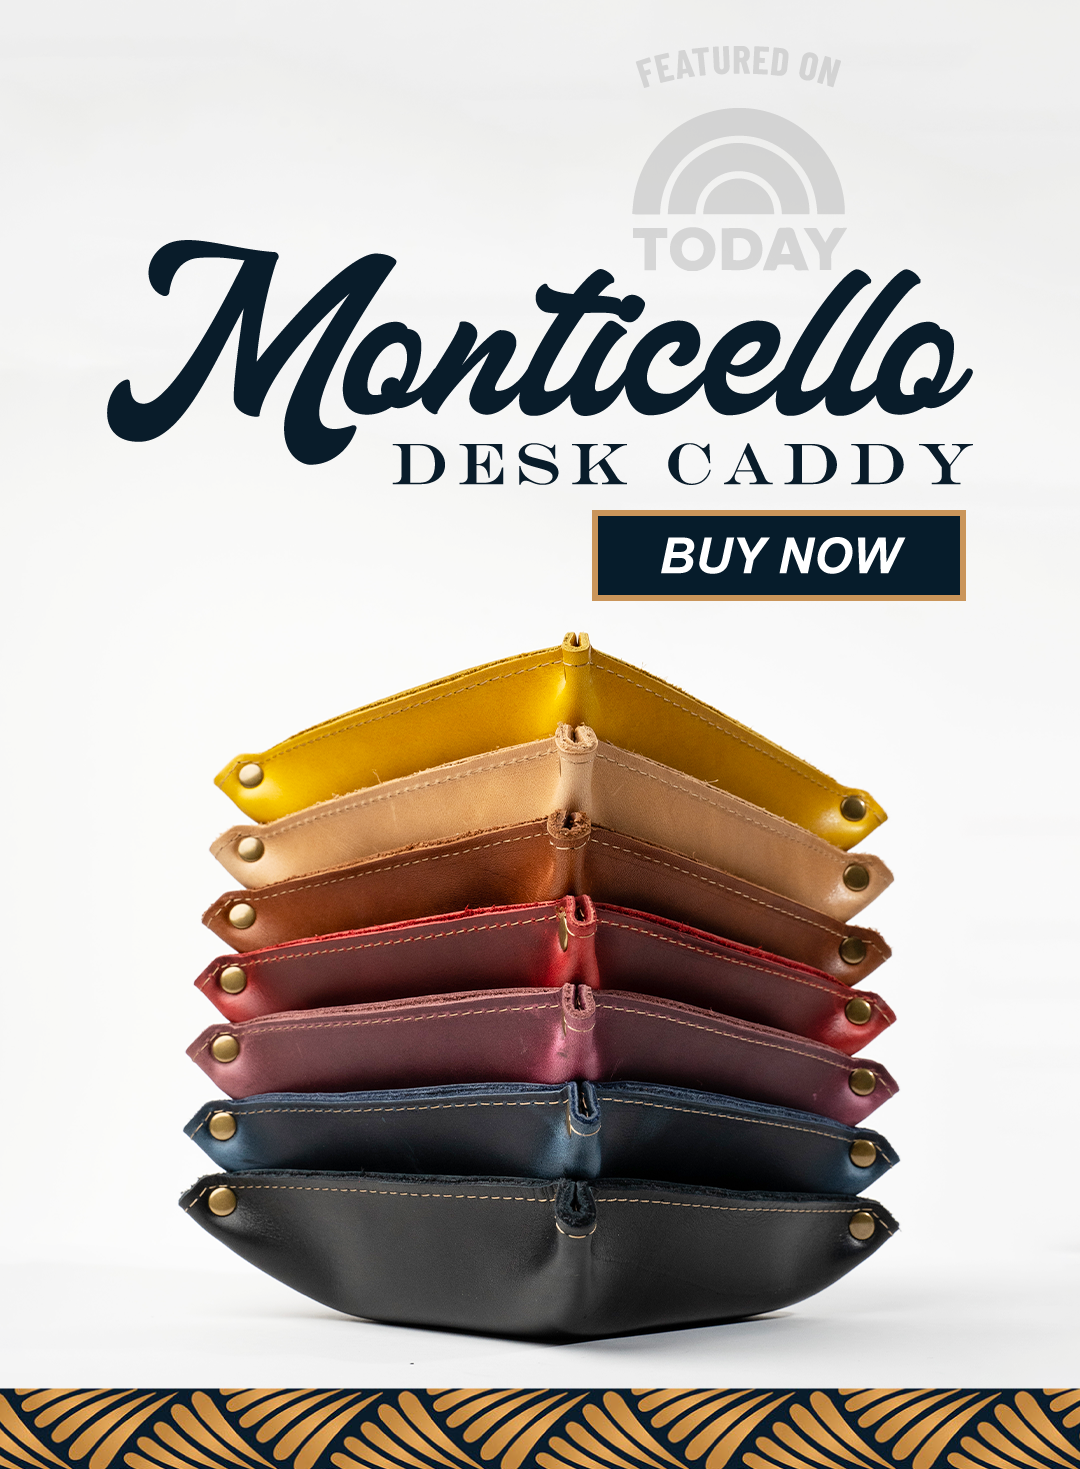 Full Grain Leather Desk Caddy Organizer with YOUR LOGO, The Monticello -  Holtz Leather